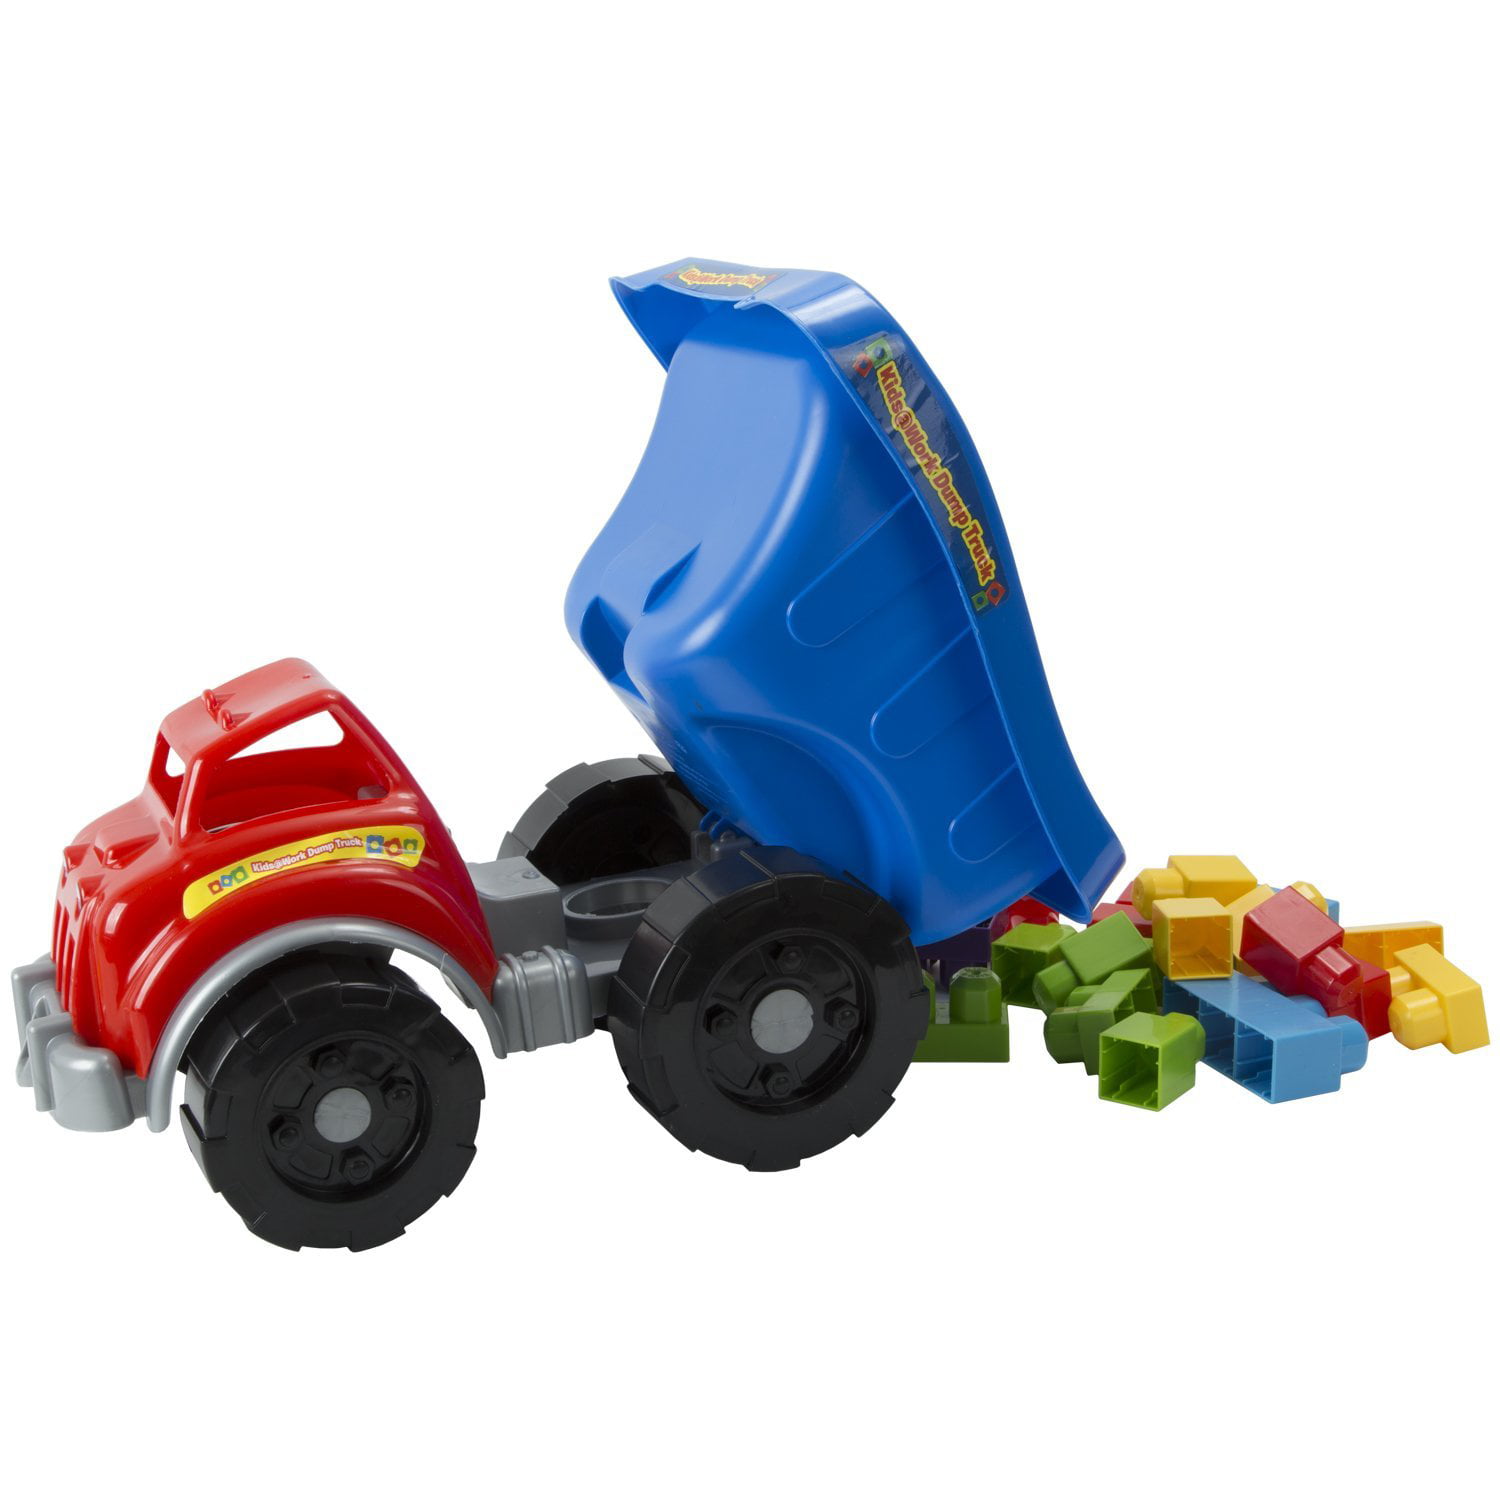 Kids at Work Block Dump Truck Set, 25-Piece, This toy includes 25 Blocks  with a cool new Dump Truck By Amloid Ship from US